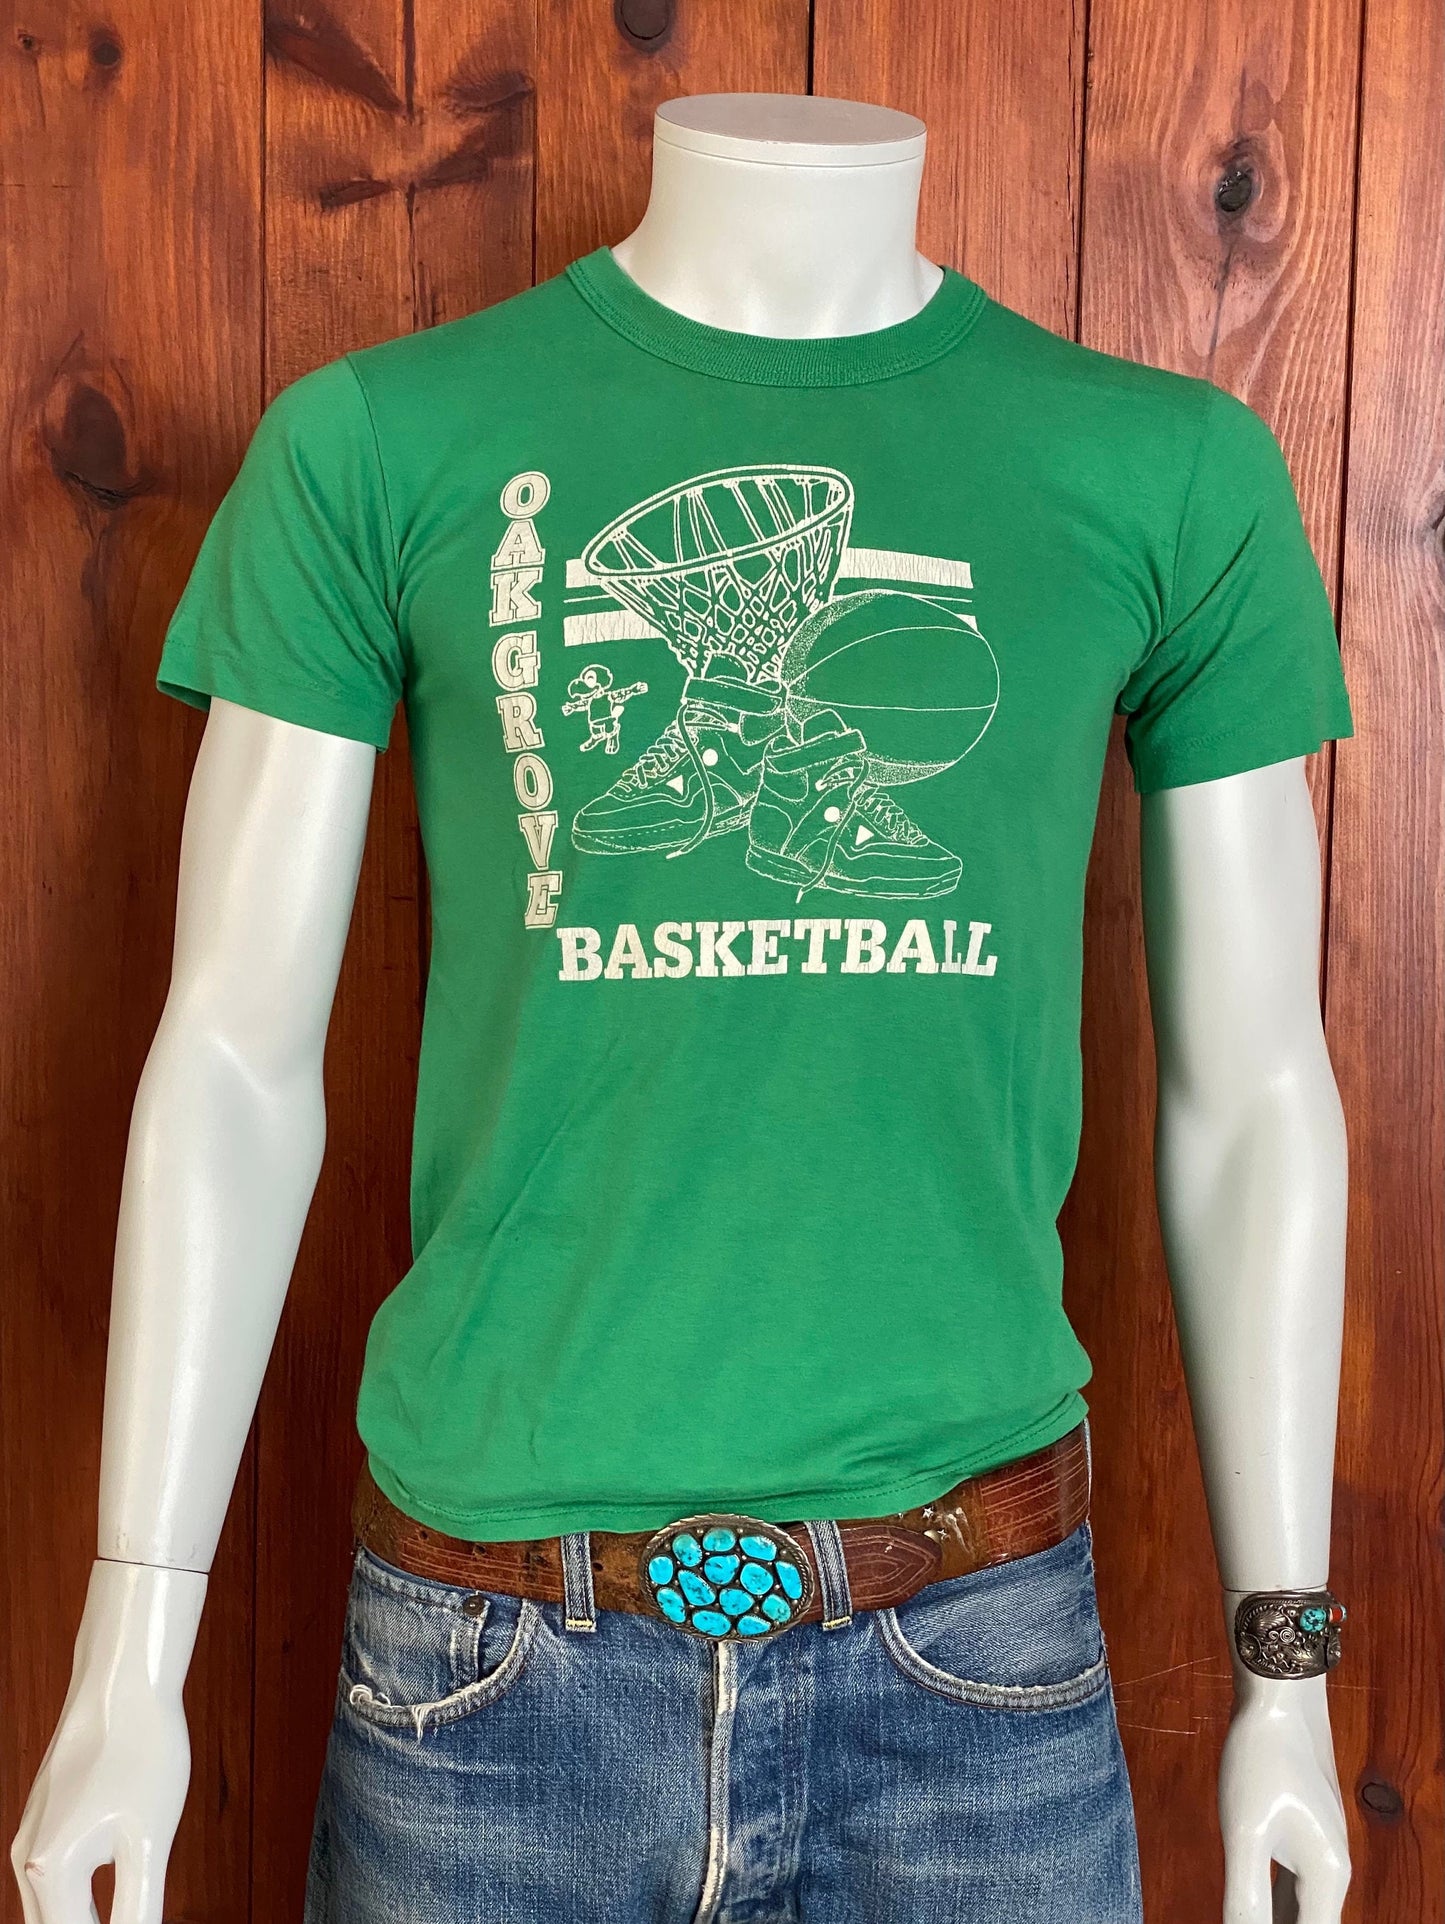 Vintage 80s Basketball T-shirt 50/50 Made in USA by Russell - Size S